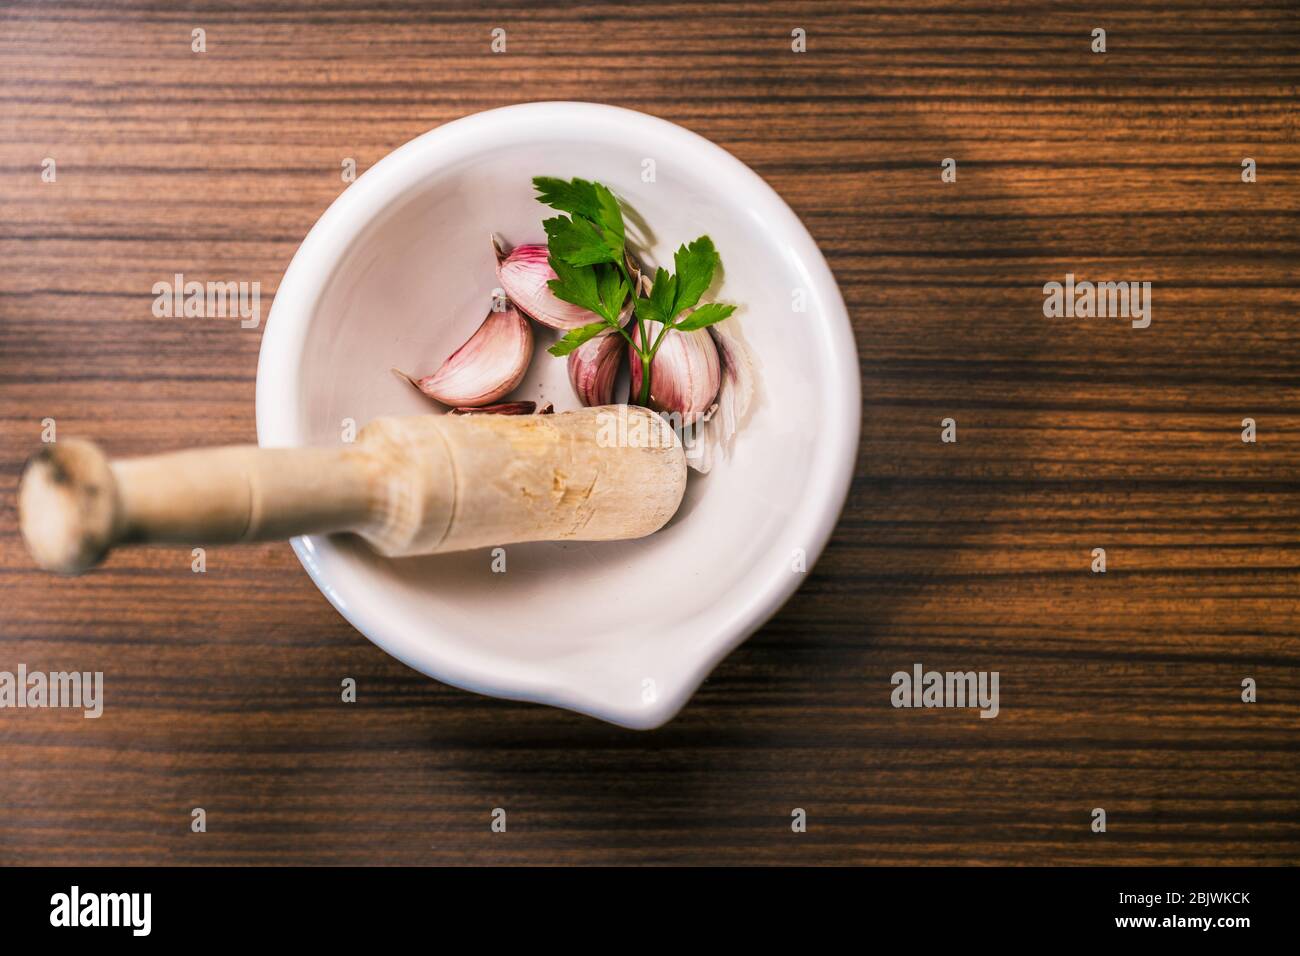 Preparing a recipe to make aioli in a traditional and homemade way. Ingredients and utensils to prepare garlic oil. Different garlic cloves, parsley l Stock Photo